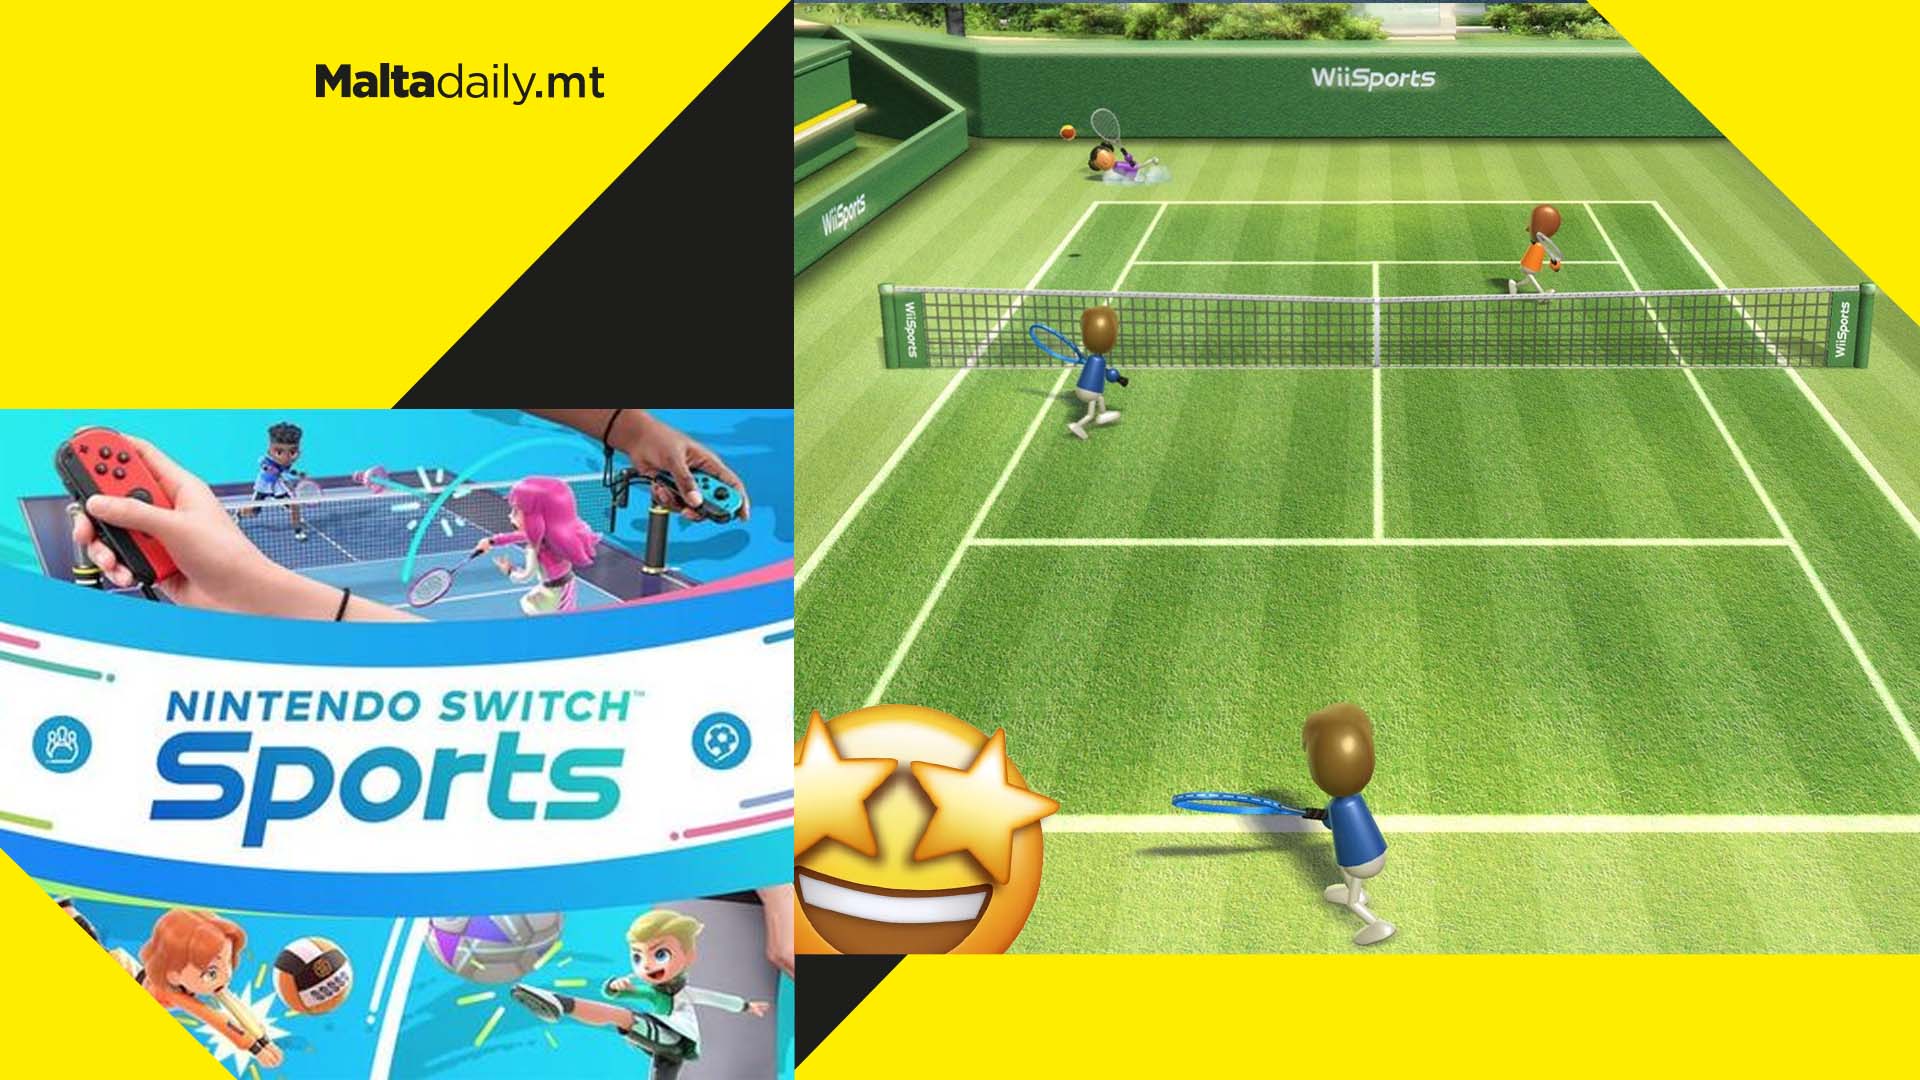 A Wii Sports sequel is coming to Nintendo Switch after 13 years